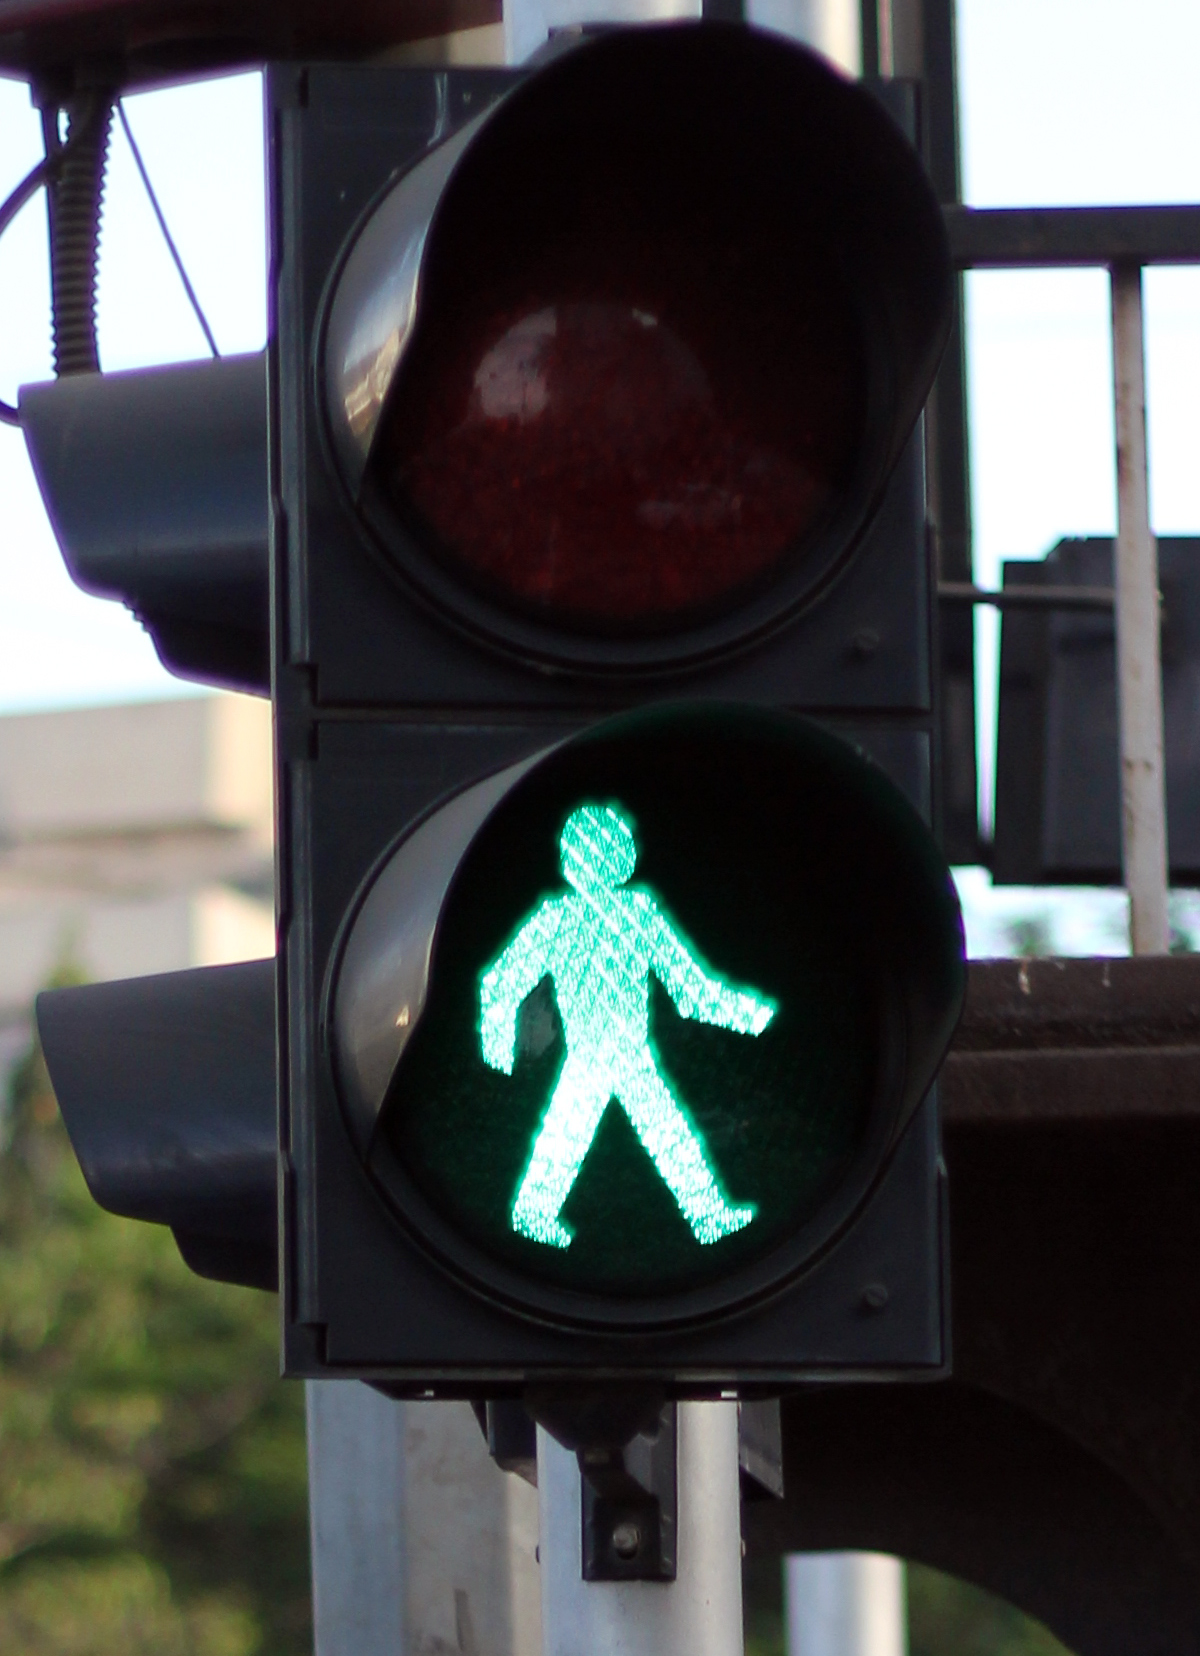 Walk Sign Traffic Signal : Public Domain Pictures